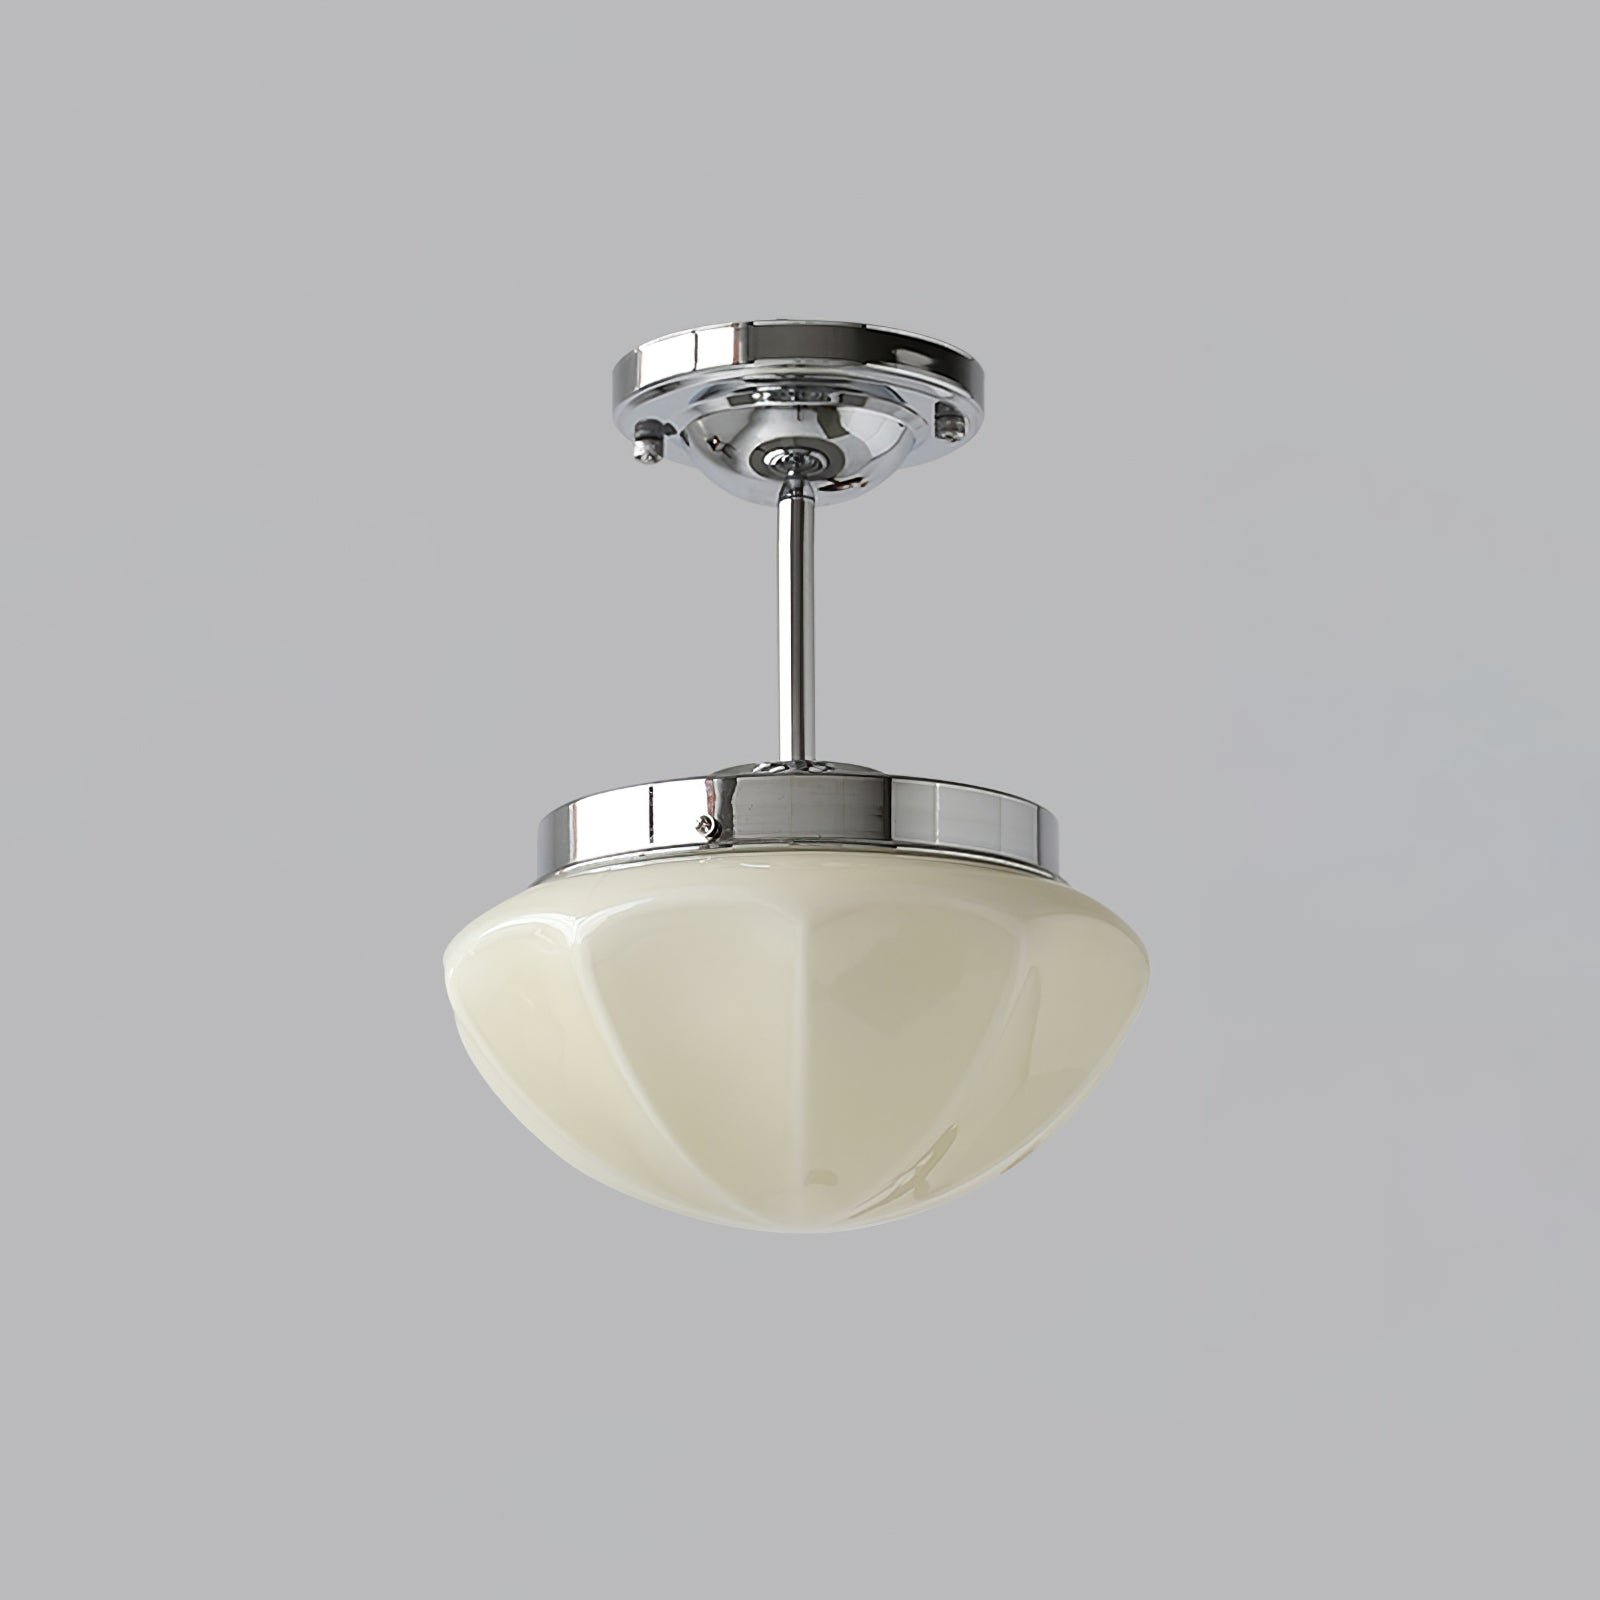 Marta Mini Pendant Lamp in Silver and Beige, with Measurements of Diameter 9.8 inches and Height 11.8 inches (25cm x 30cm)